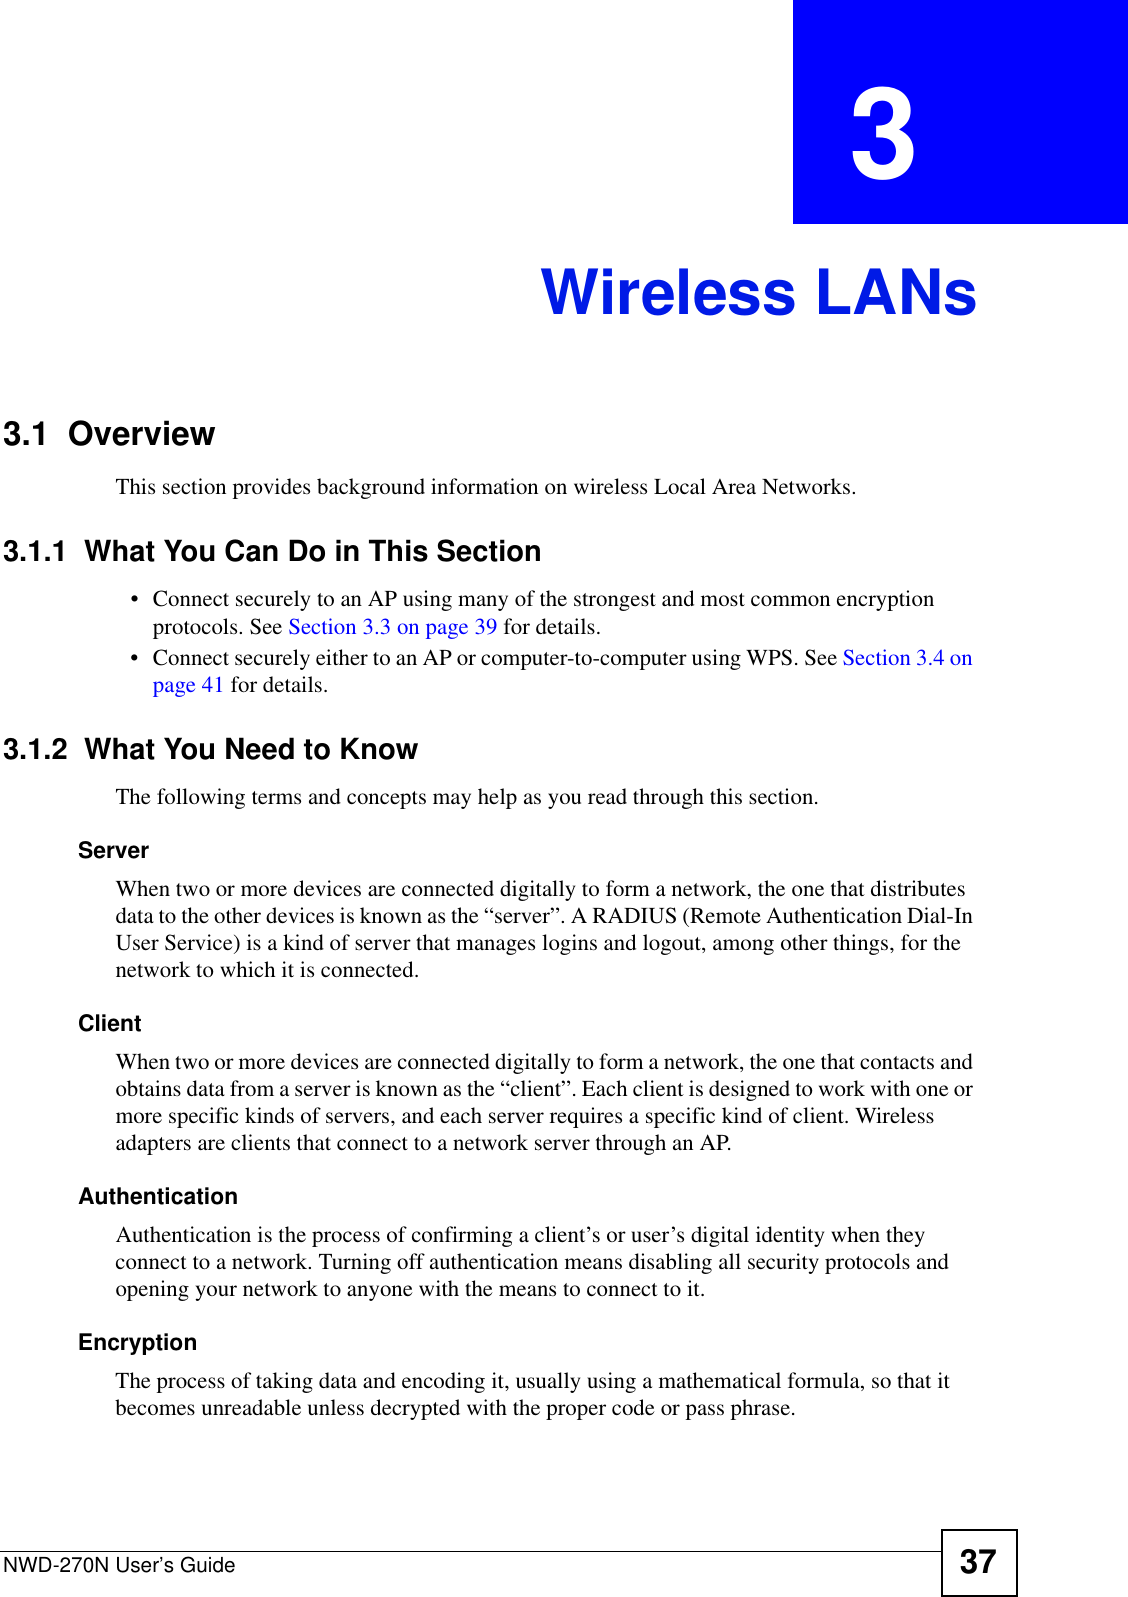 NWD-270N User’s Guide 37CHAPTER  3 Wireless LANs3.1  OverviewThis section provides background information on wireless Local Area Networks.3.1.1  What You Can Do in This Section• Connect securely to an AP using many of the strongest and most common encryption protocols. See Section 3.3 on page 39 for details.• Connect securely either to an AP or computer-to-computer using WPS. See Section 3.4 on page 41 for details.3.1.2  What You Need to KnowThe following terms and concepts may help as you read through this section.ServerWhen two or more devices are connected digitally to form a network, the one that distributes data to the other devices is known as the “server”. A RADIUS (Remote Authentication Dial-In User Service) is a kind of server that manages logins and logout, among other things, for the network to which it is connected.ClientWhen two or more devices are connected digitally to form a network, the one that contacts and obtains data from a server is known as the “client”. Each client is designed to work with one or more specific kinds of servers, and each server requires a specific kind of client. Wireless adapters are clients that connect to a network server through an AP.AuthenticationAuthentication is the process of confirming a client’s or user’s digital identity when they connect to a network. Turning off authentication means disabling all security protocols and opening your network to anyone with the means to connect to it.EncryptionThe process of taking data and encoding it, usually using a mathematical formula, so that it becomes unreadable unless decrypted with the proper code or pass phrase.